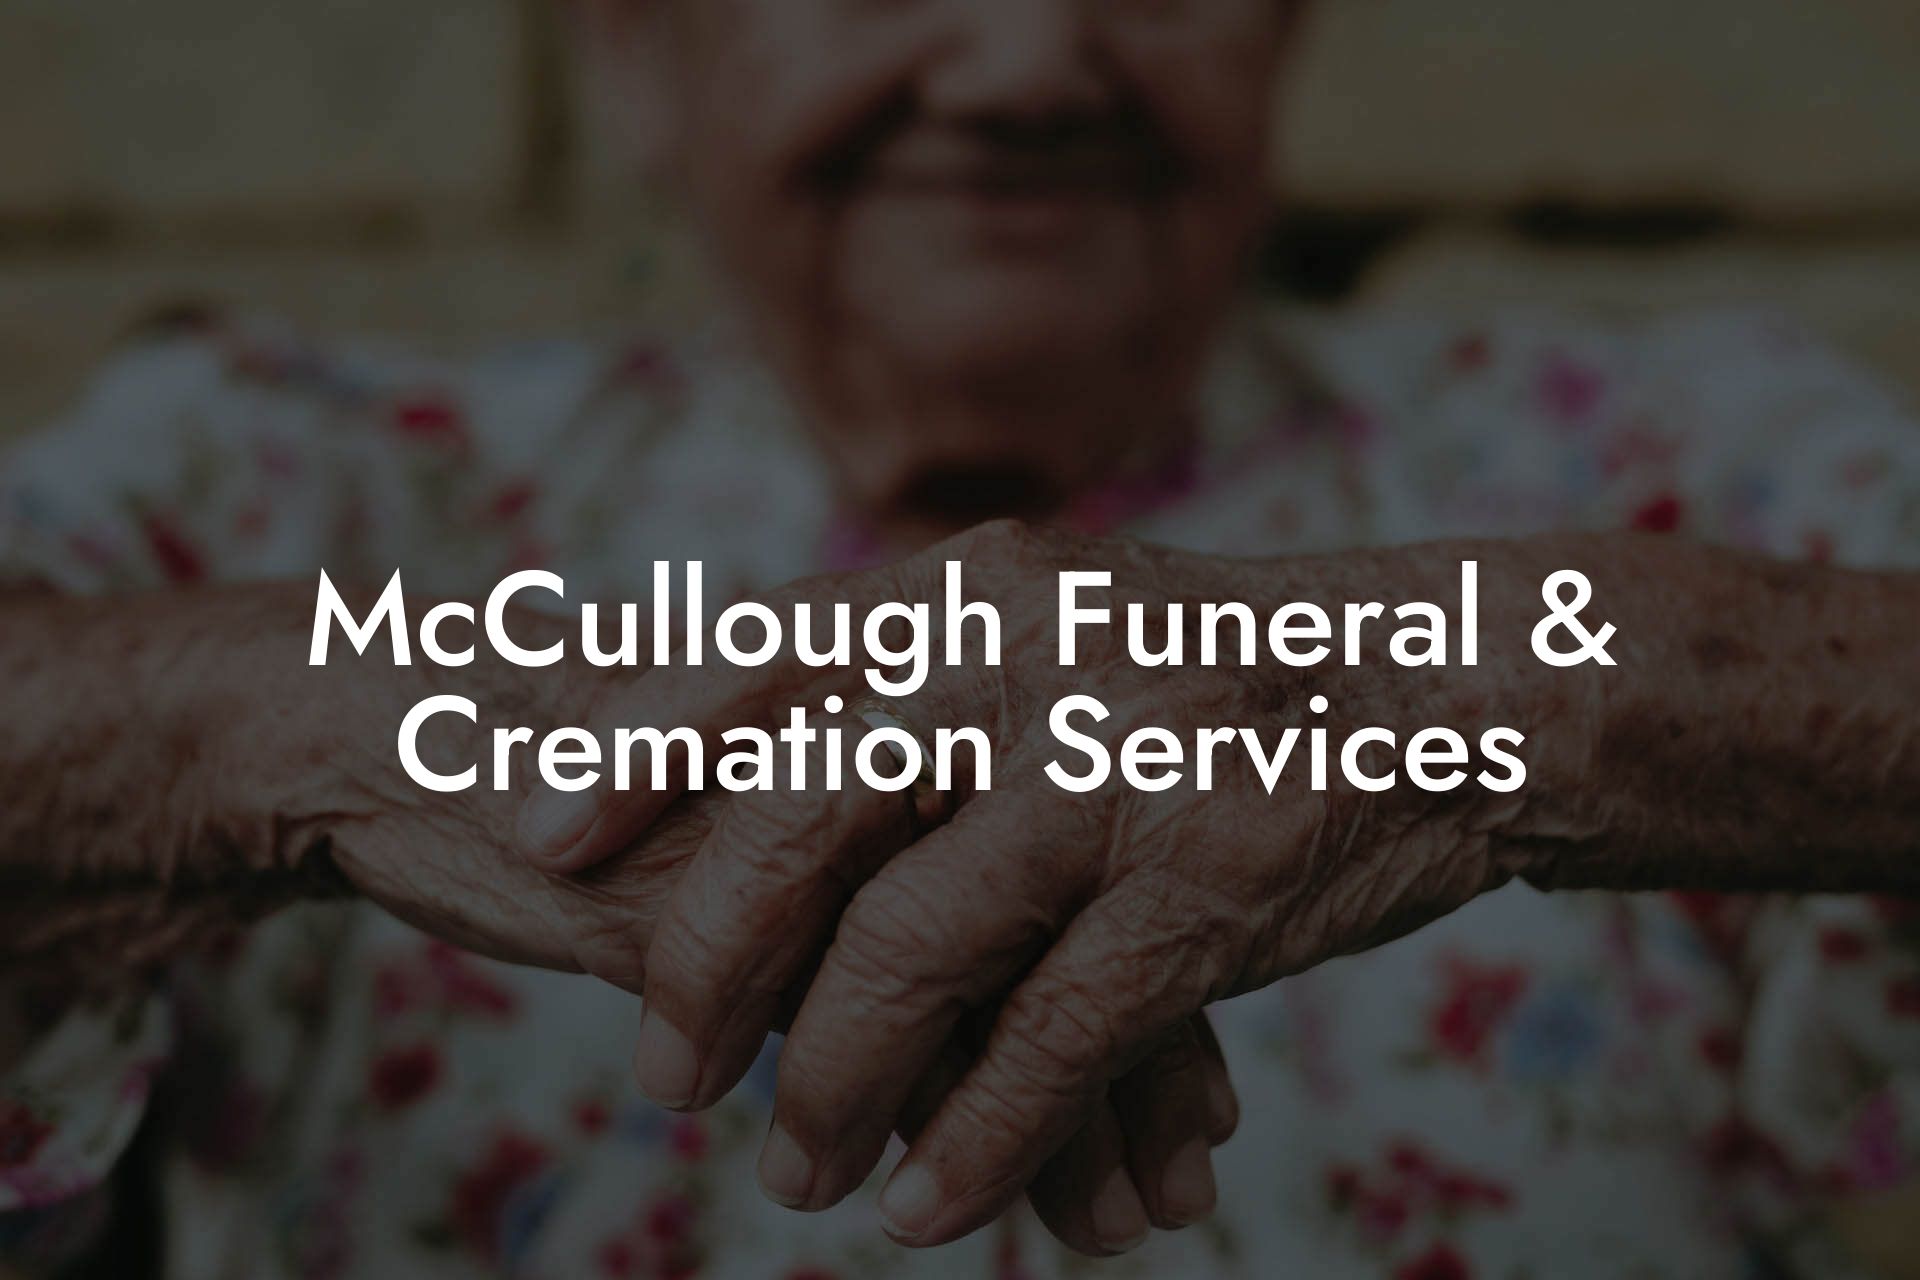 McCullough Funeral & Cremation Services